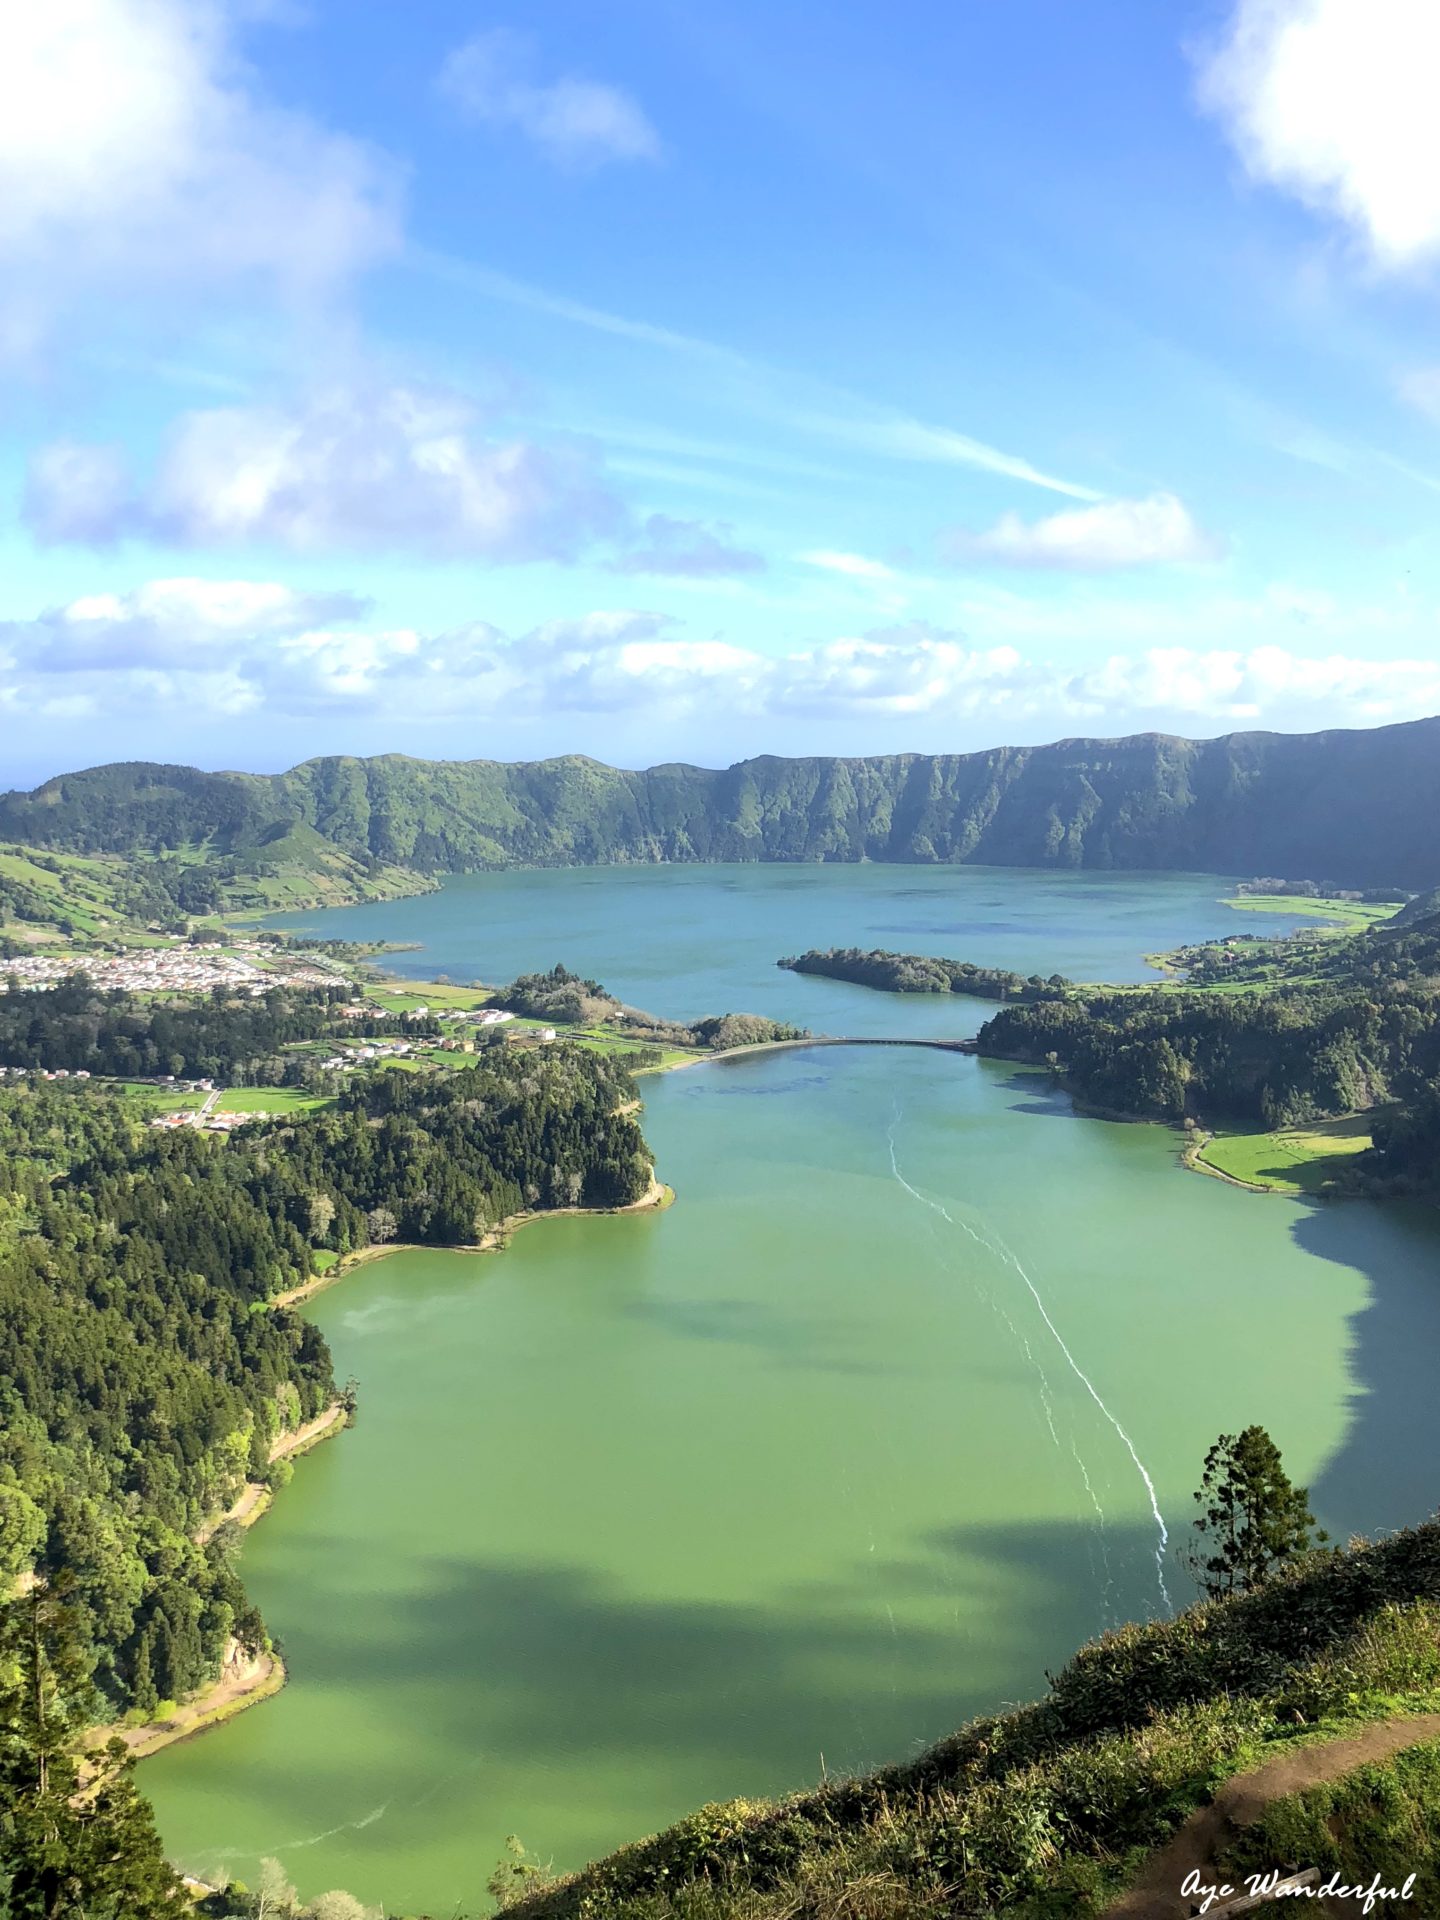 The Azores Travel Guide – The Ultimate Itinerary for São Miguel